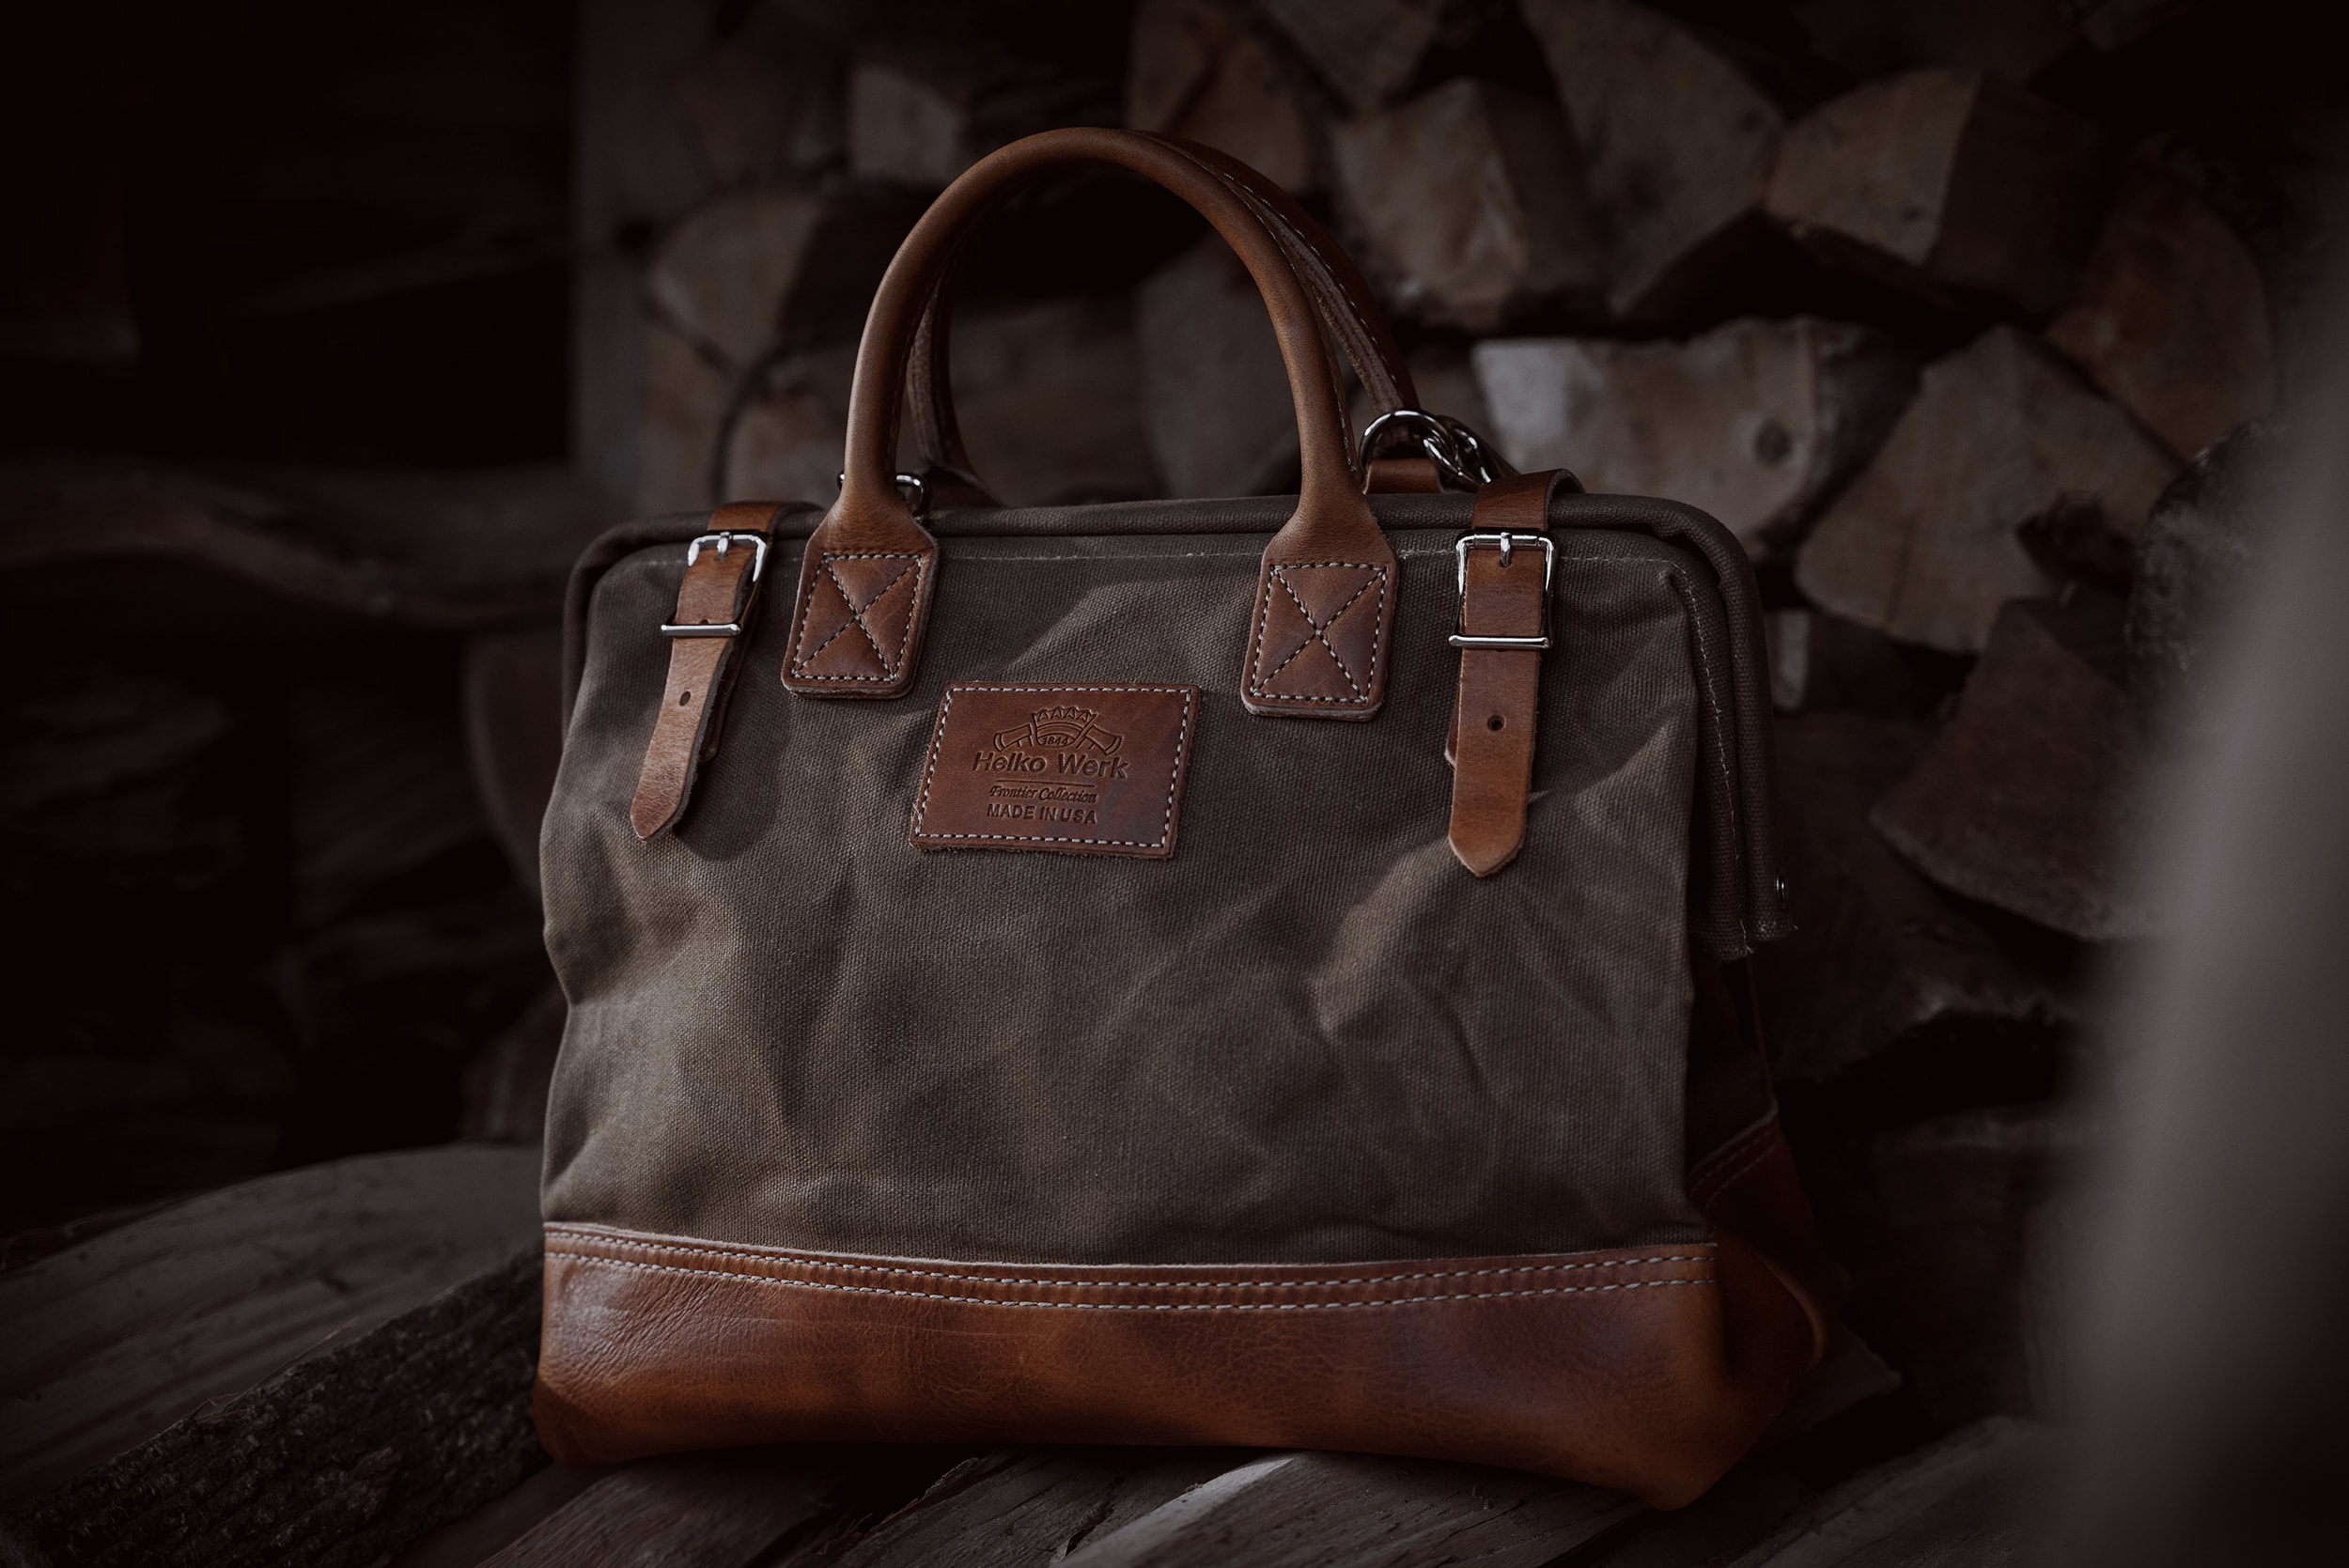 Leather Flight Bag - Made in USA